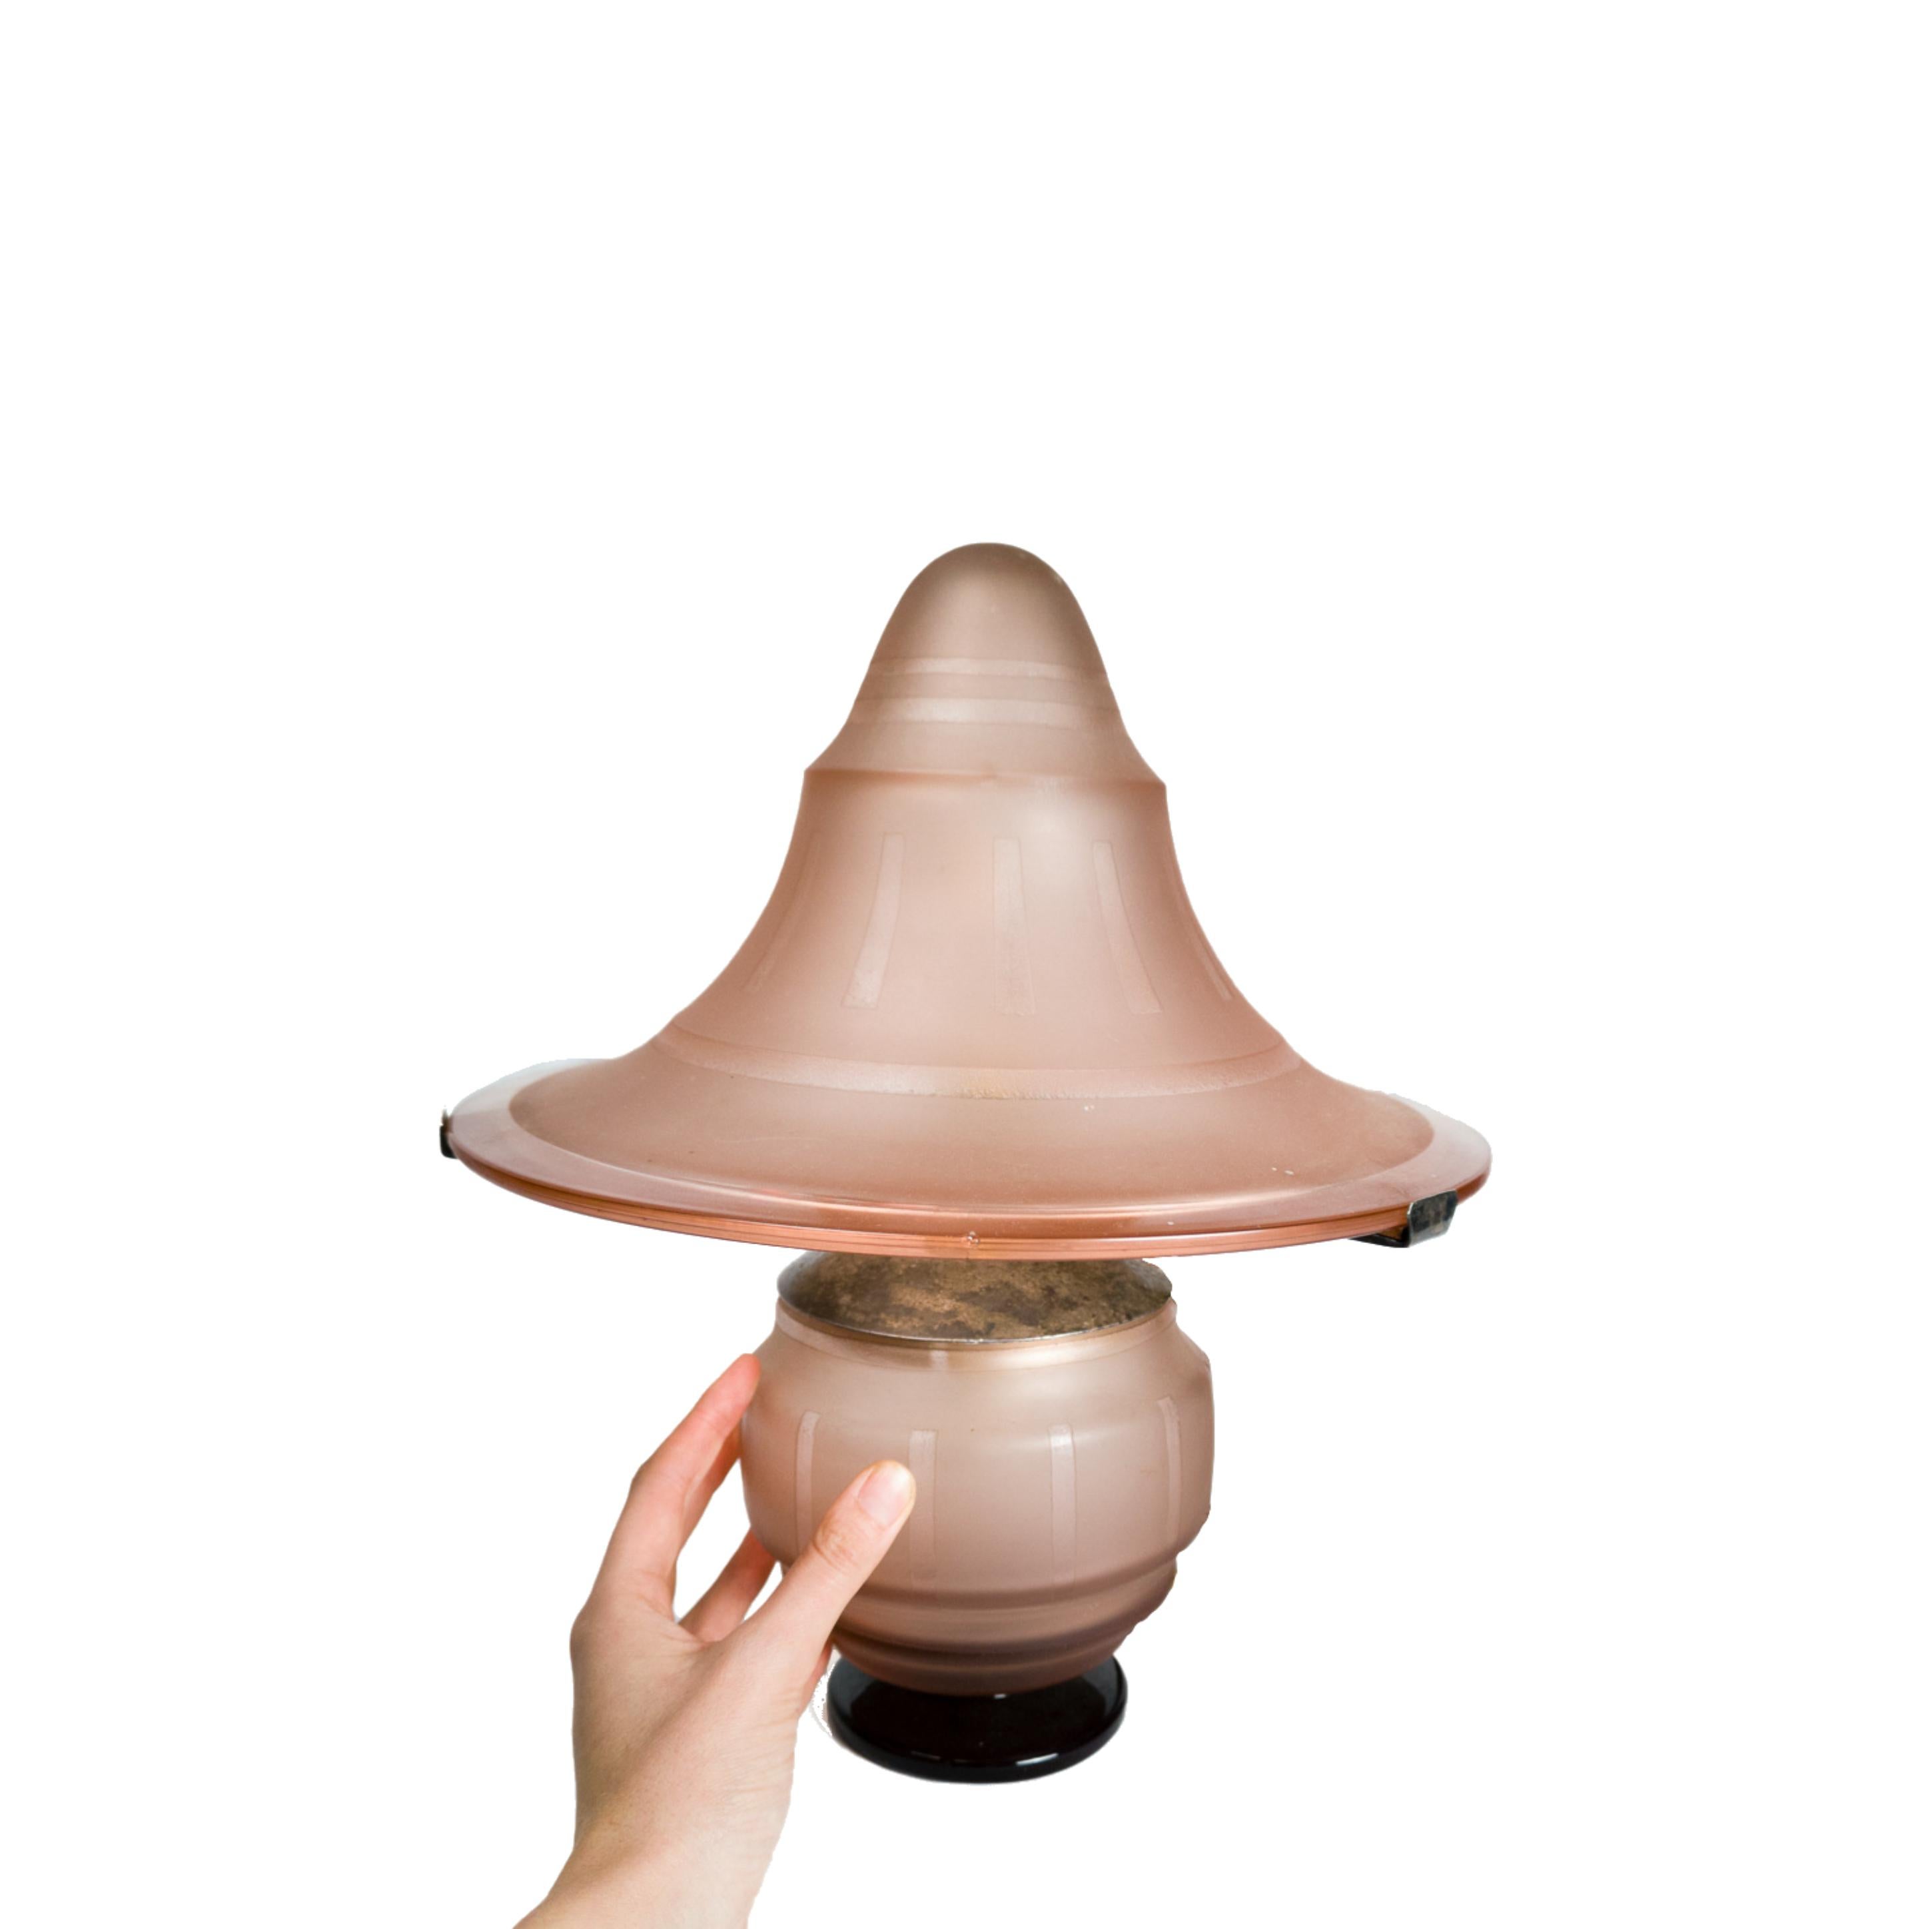 A 1930s unusual mushroom shaped table lamp with pink frosted glass and metal upper structure from the forges of Nancy.

